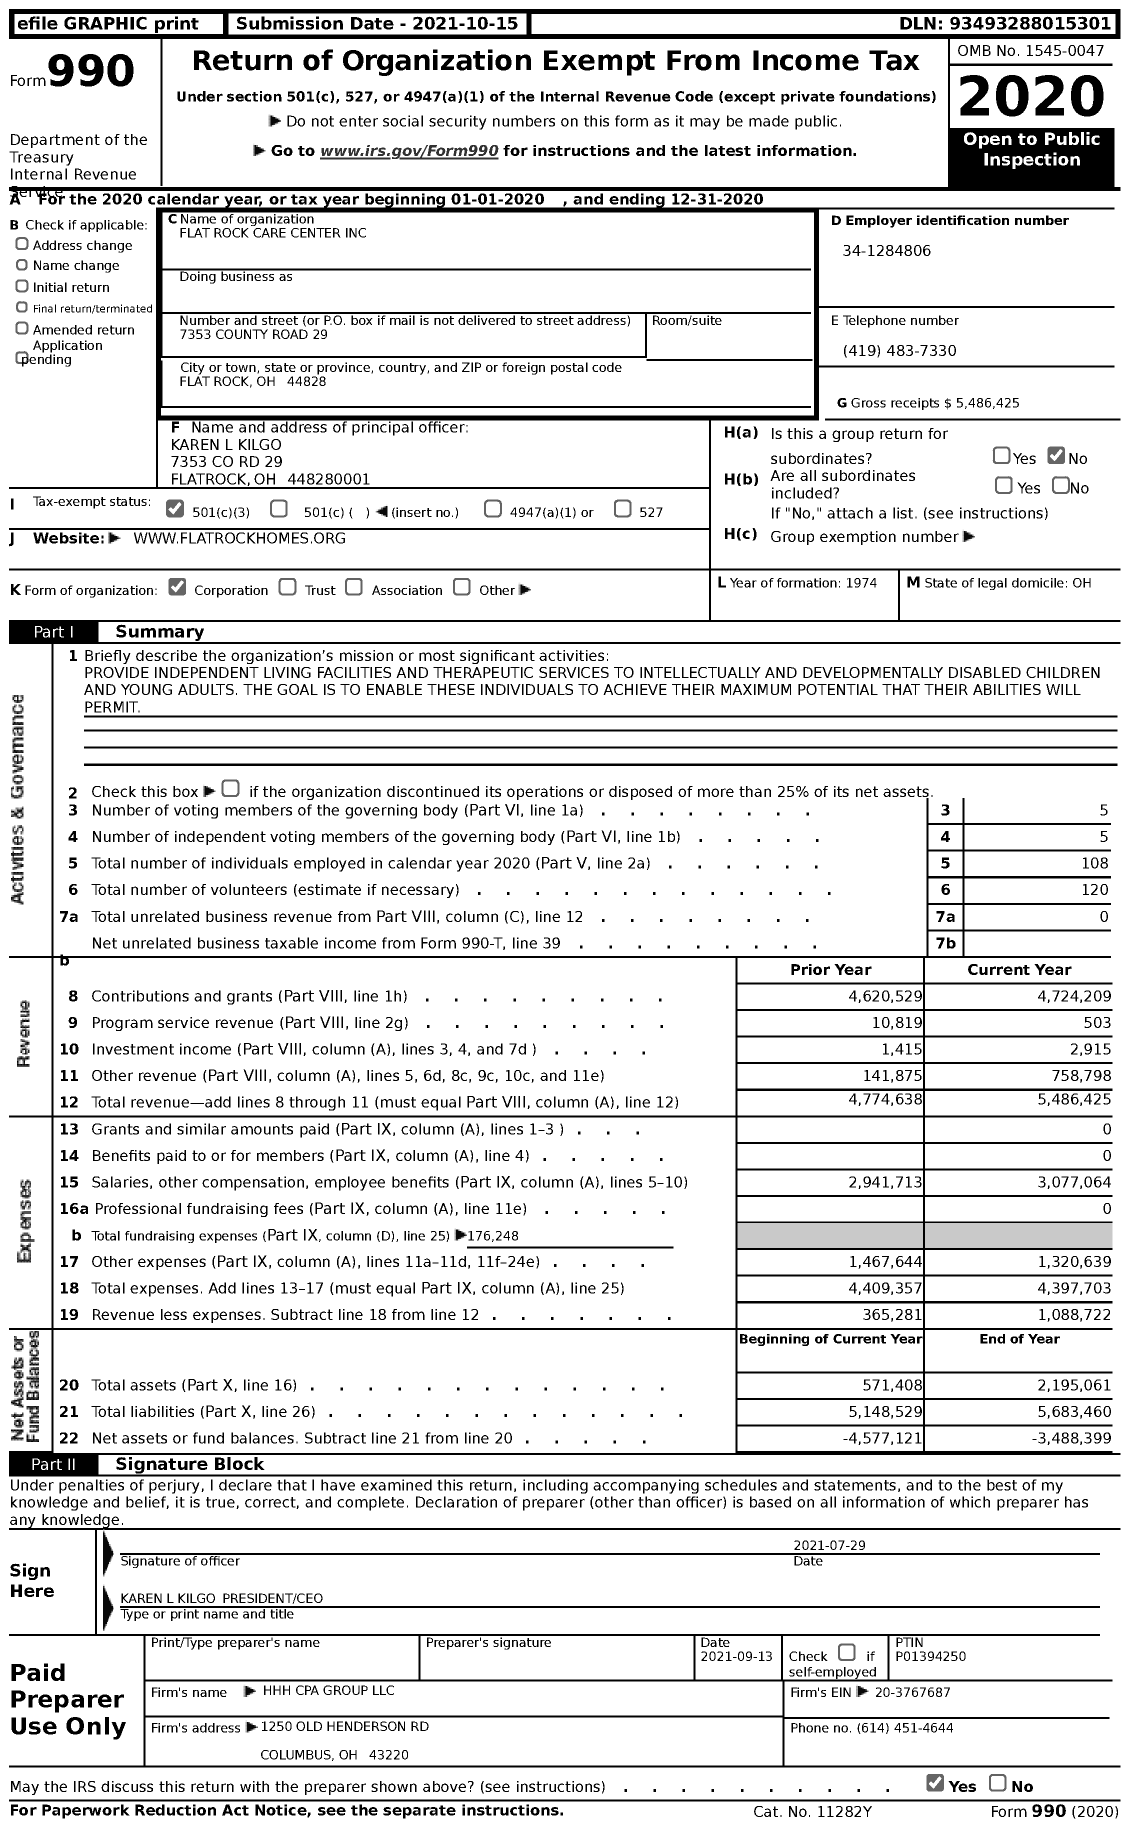 Image of first page of 2020 Form 990 for Flat Rock Care Center